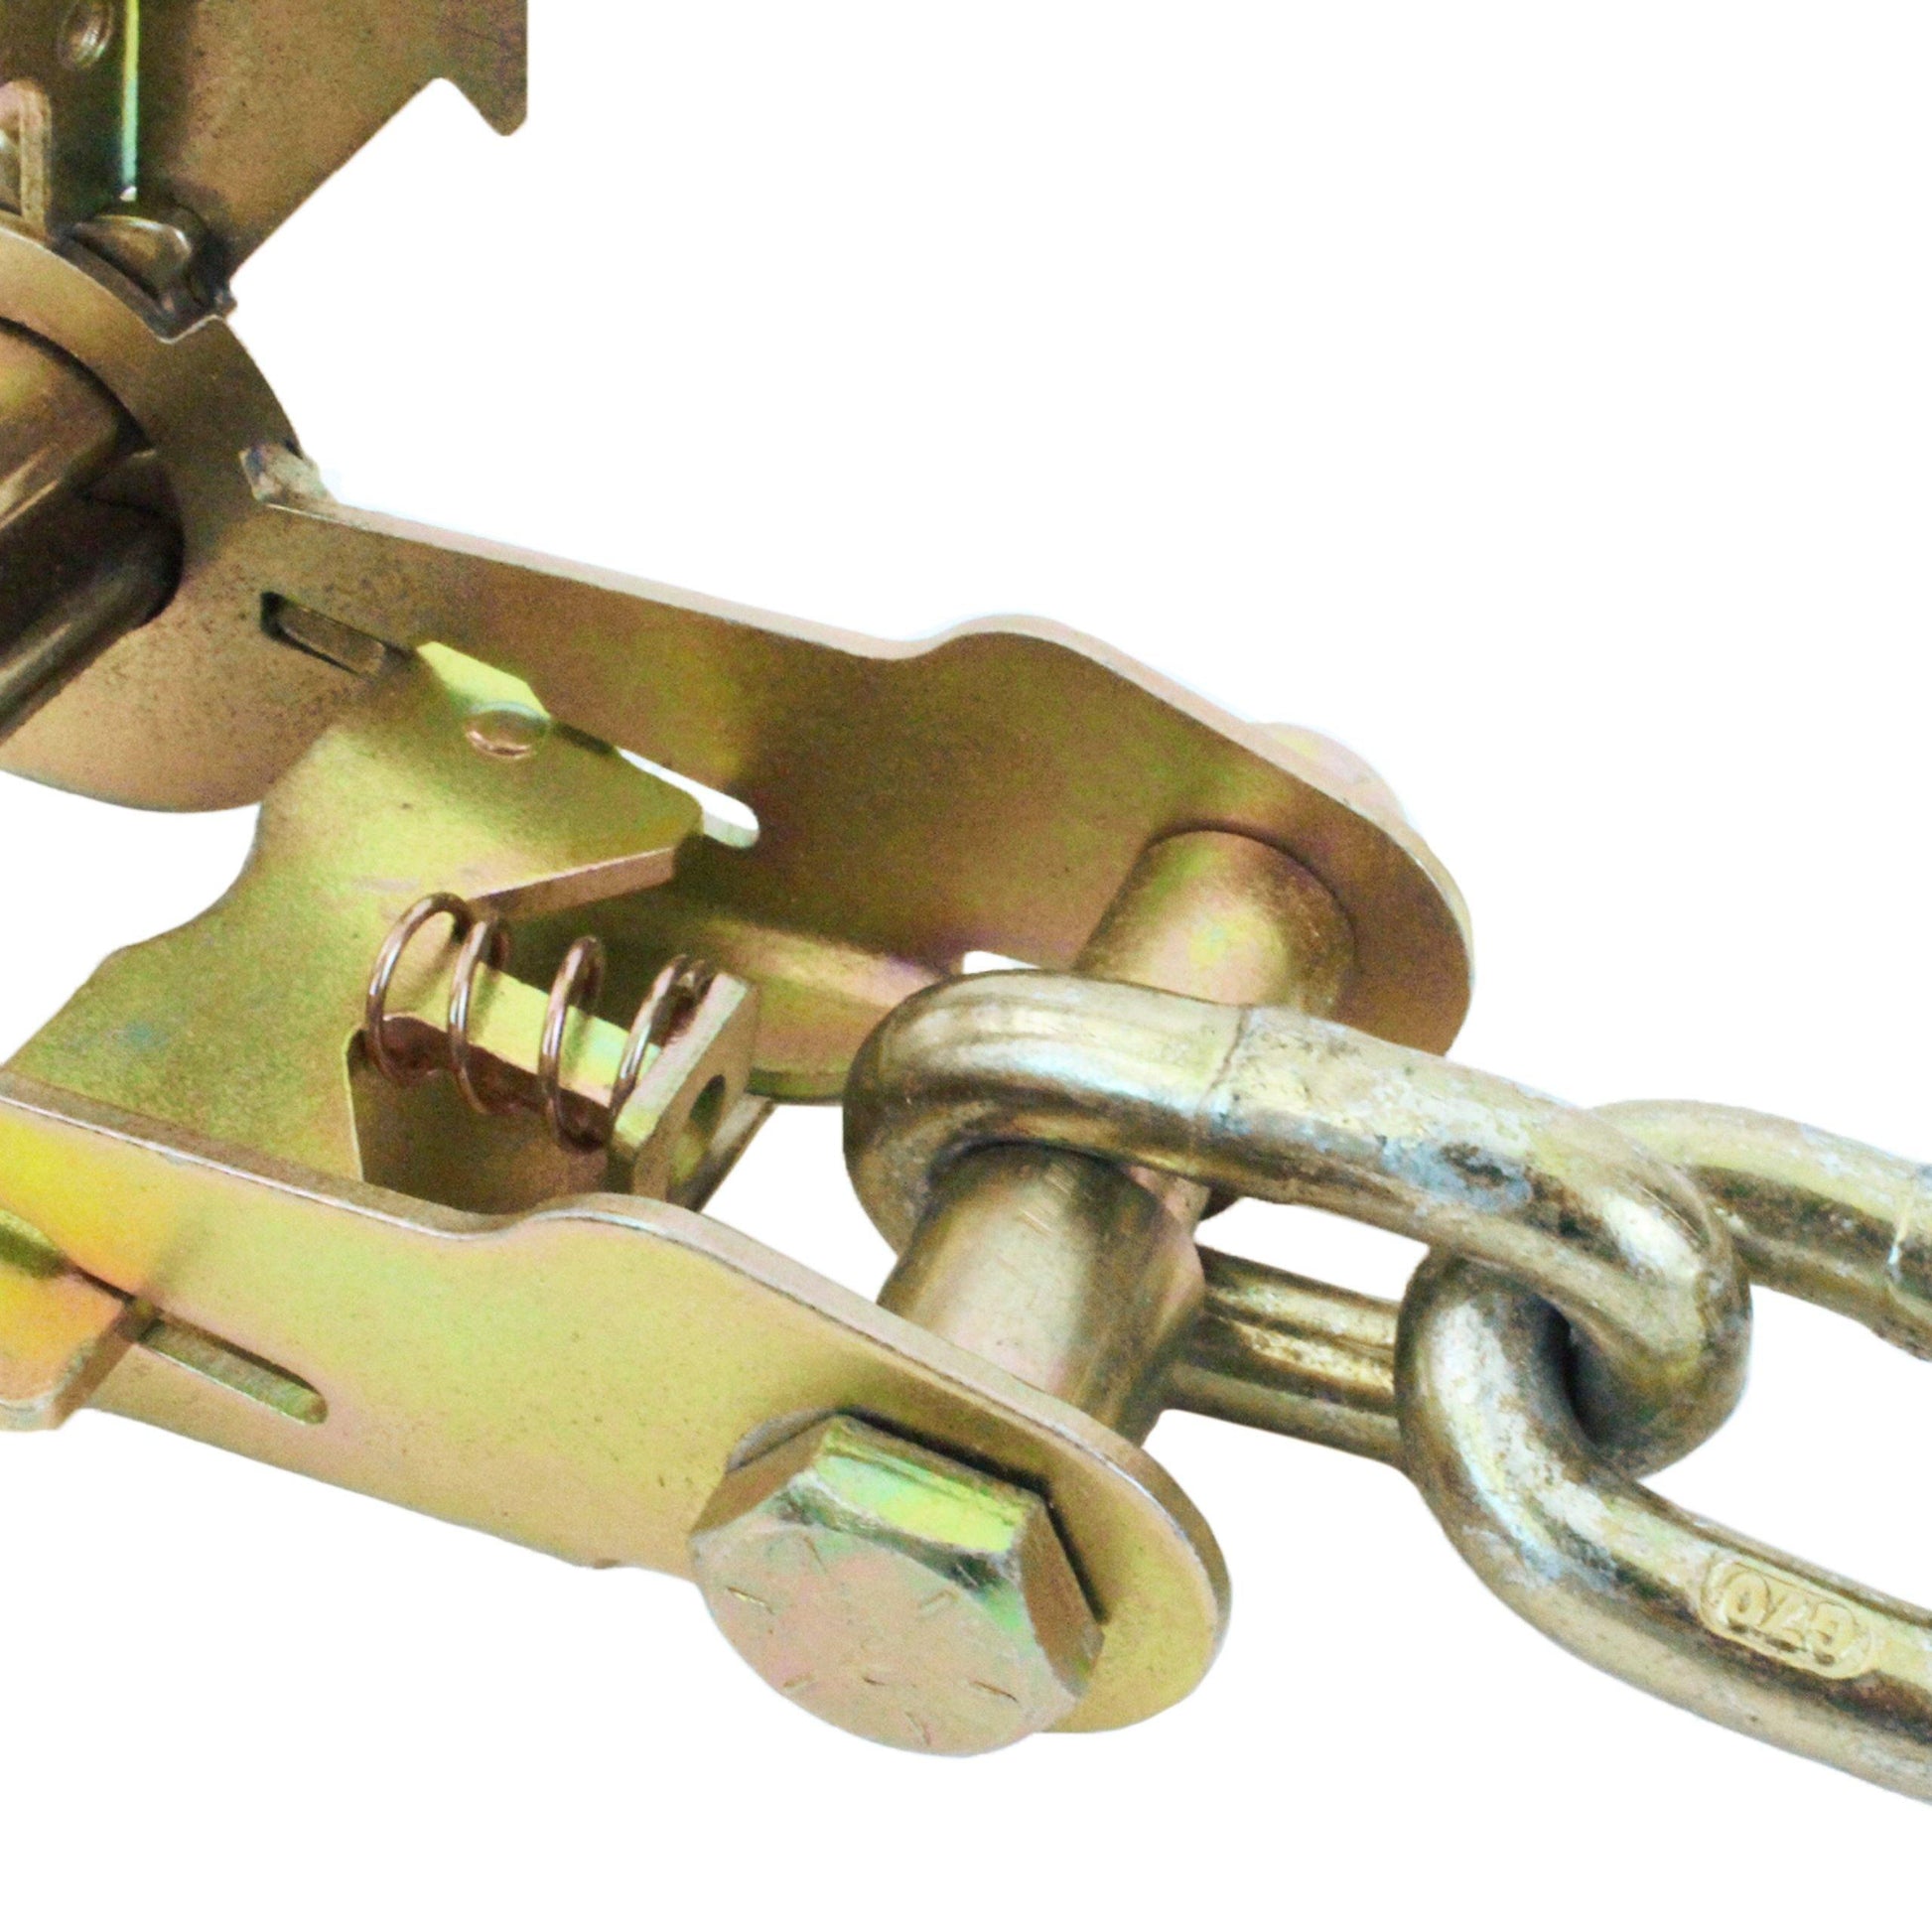 Double Locking Ratchet with Chain and Clevis Grab Hook - Boxer Tools